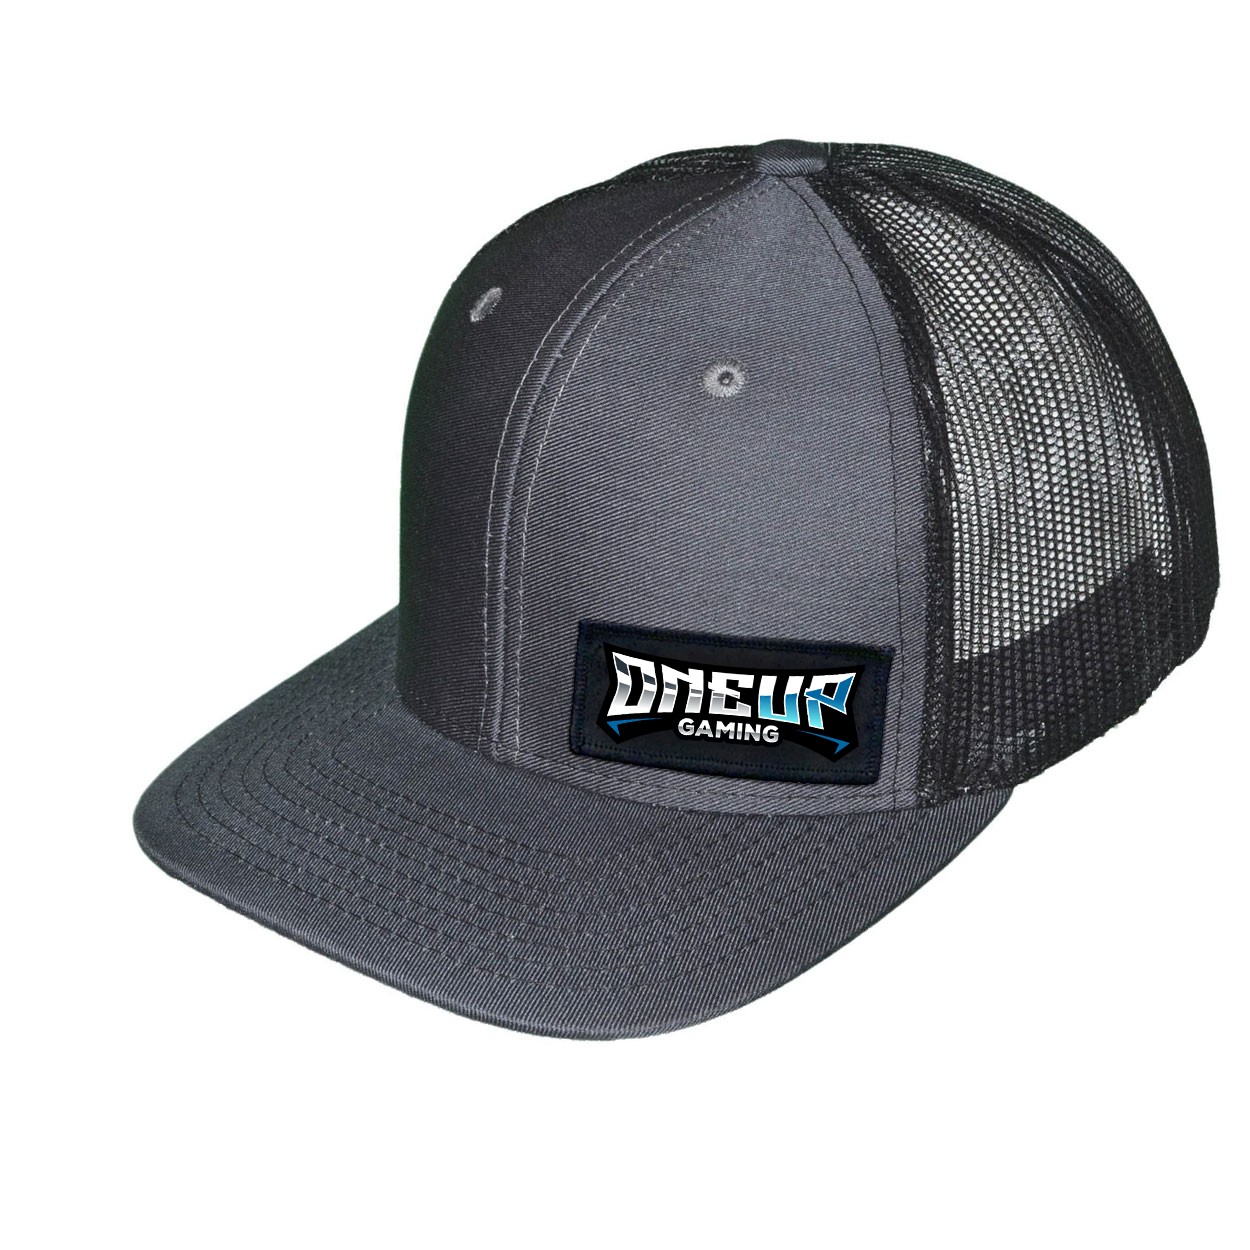 One Up Gaming Night Out Woven Patch Snapback Trucker Hat Gray/Black (White Logo)